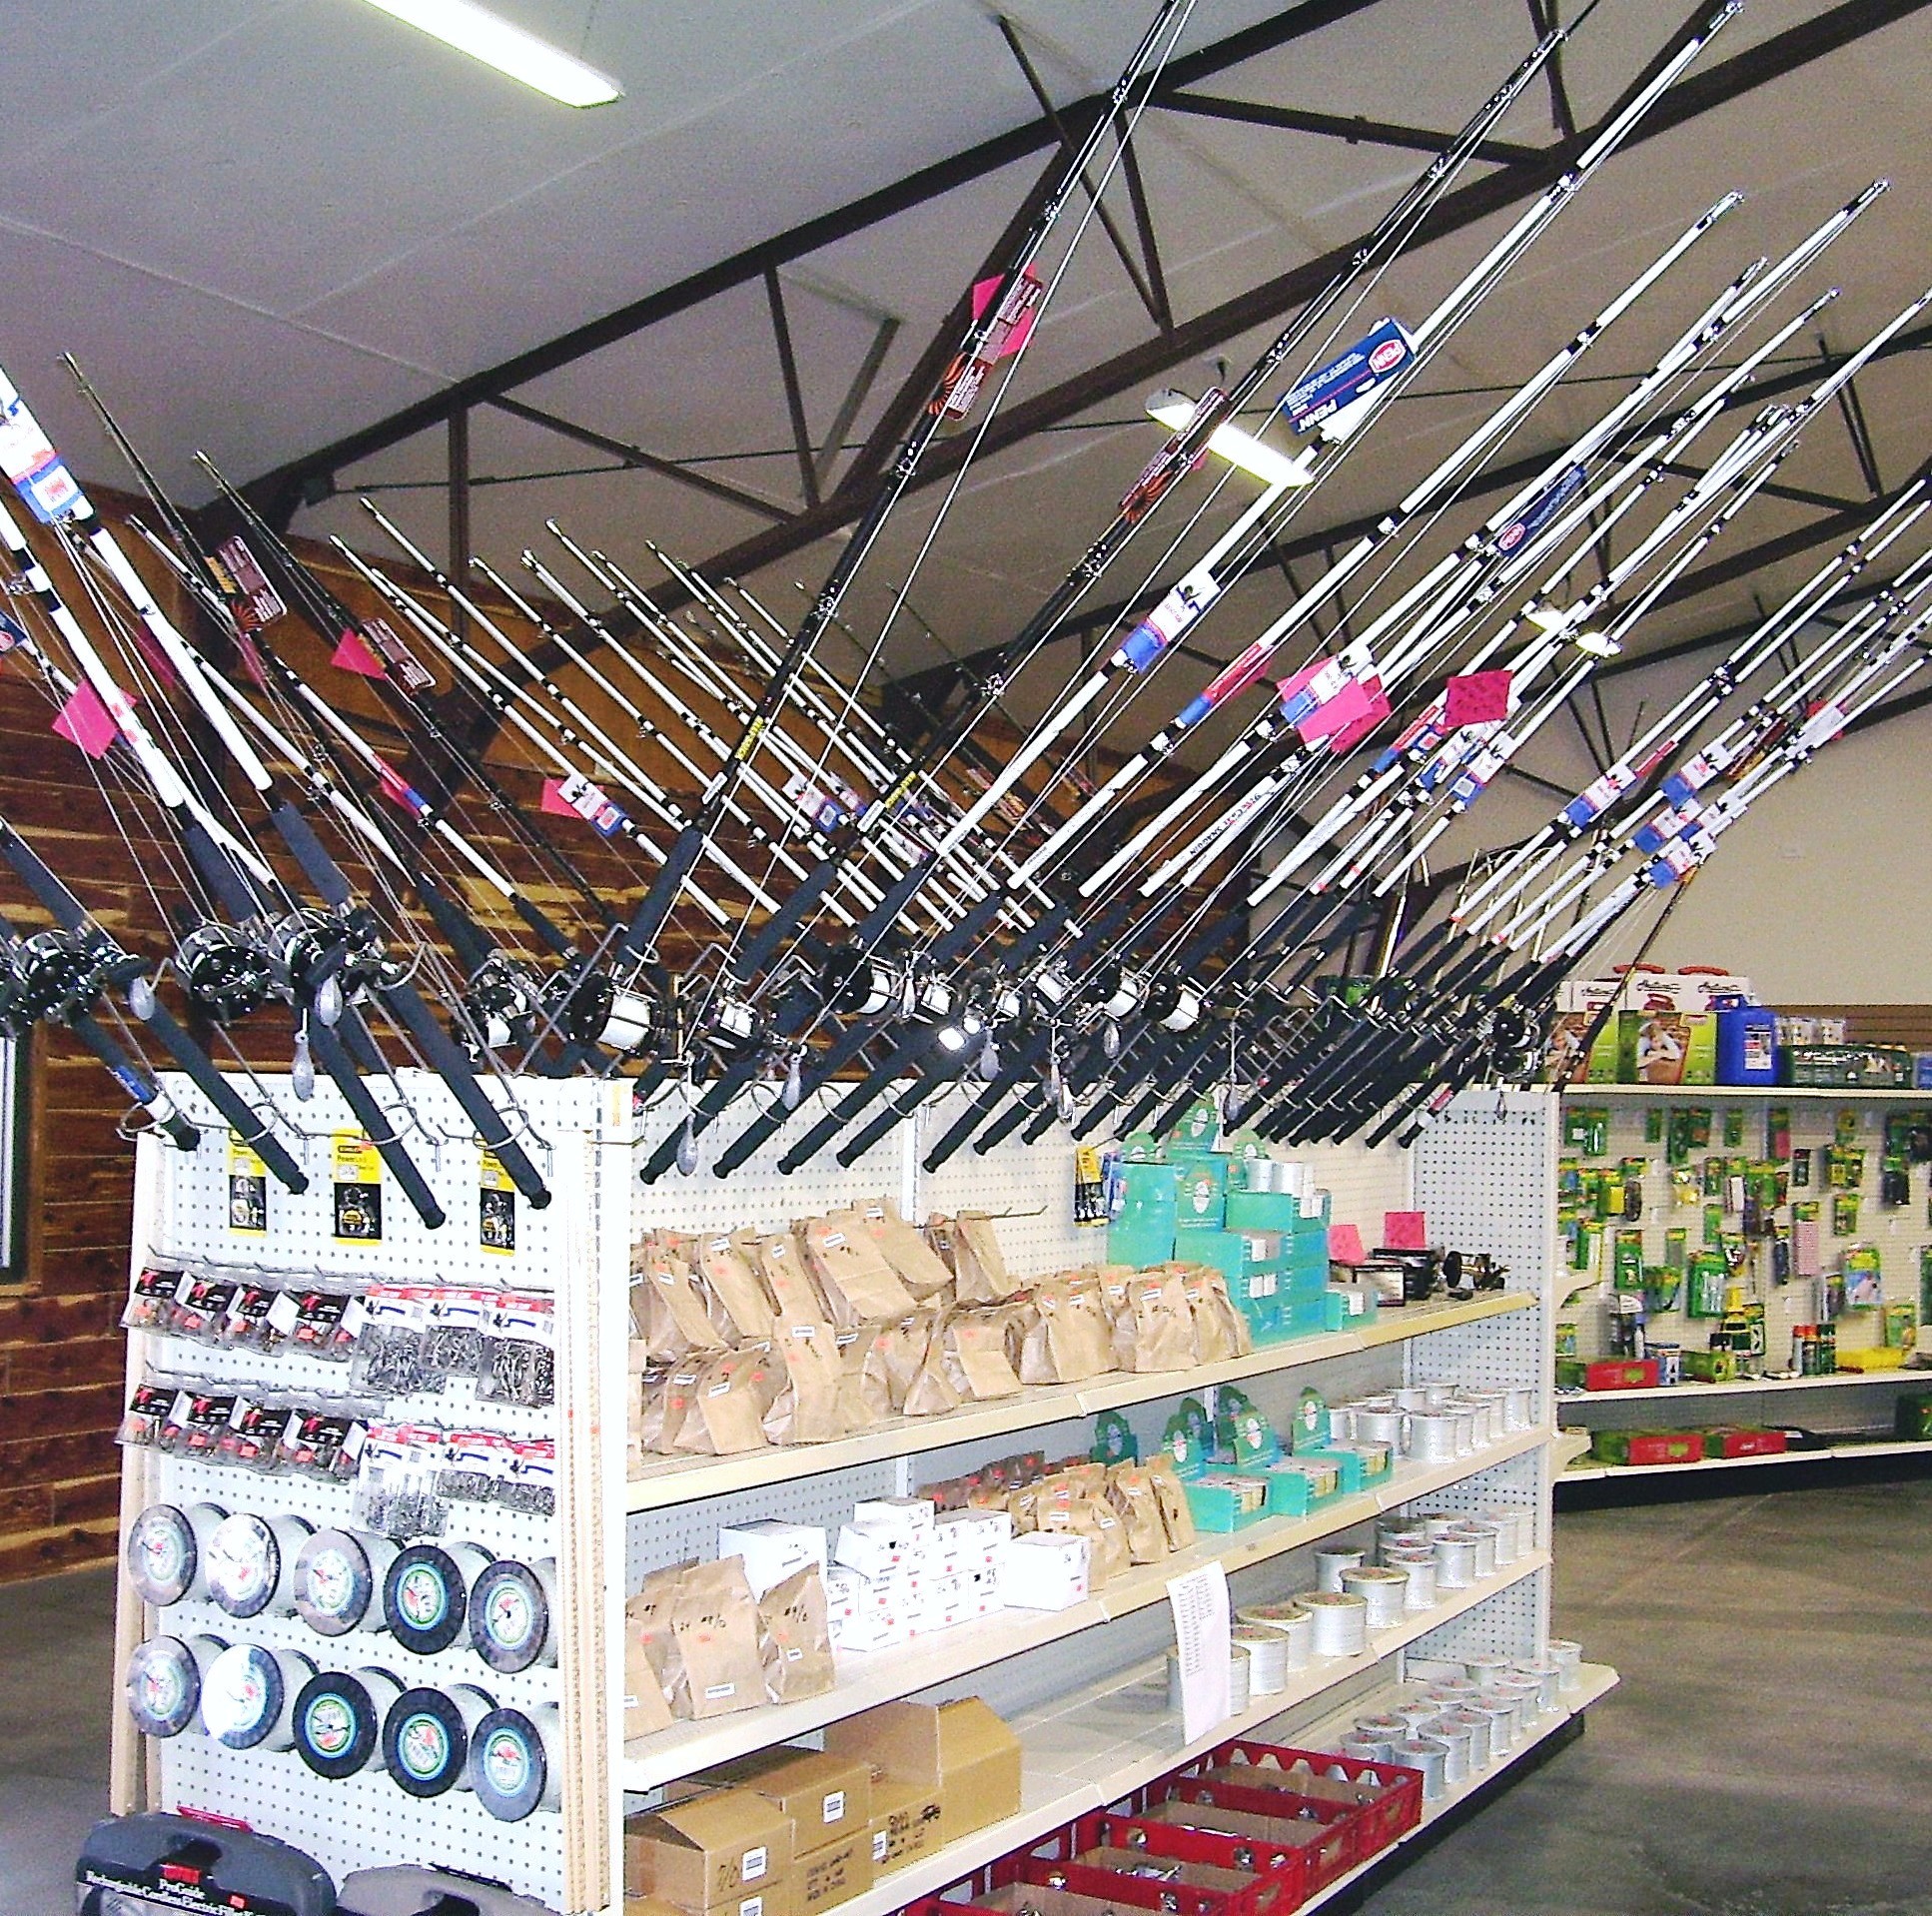 Shop Fishing Rod Display Rack Wall with great discounts and prices